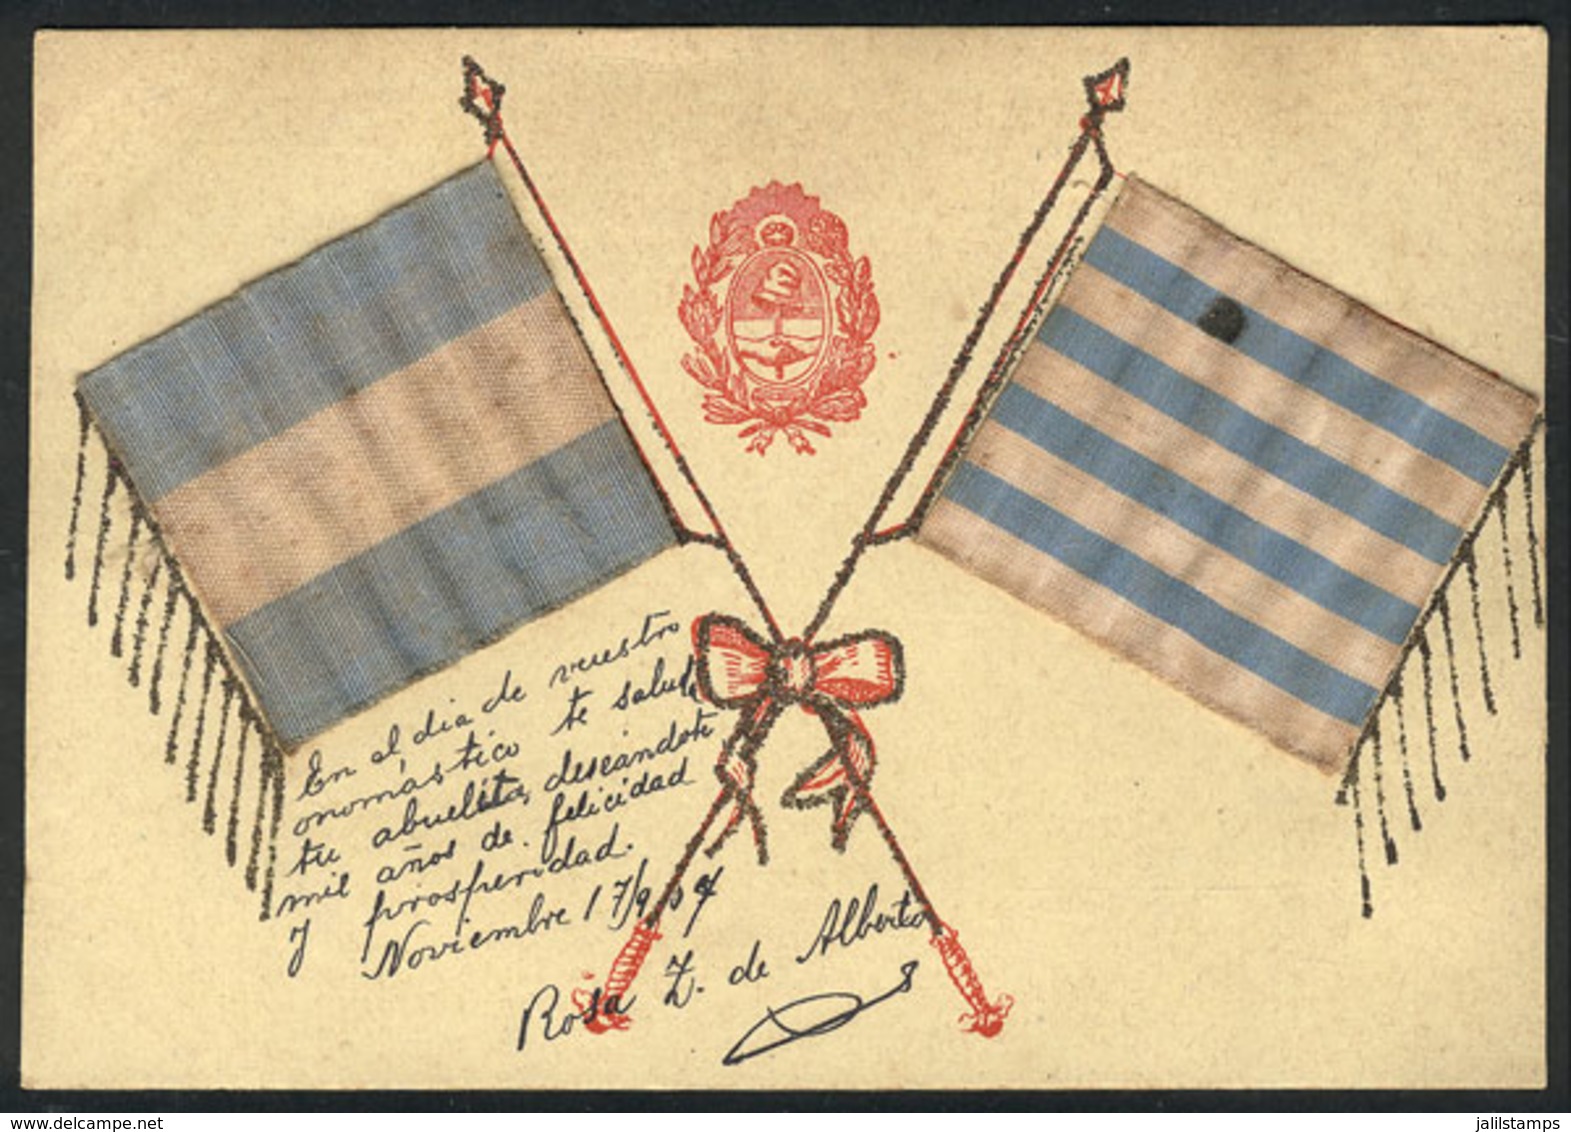 98 ARGENTINA: Flags Of Argentina And Uruguay Made Of Cloth, Used In 1907, VF Quality - Argentina